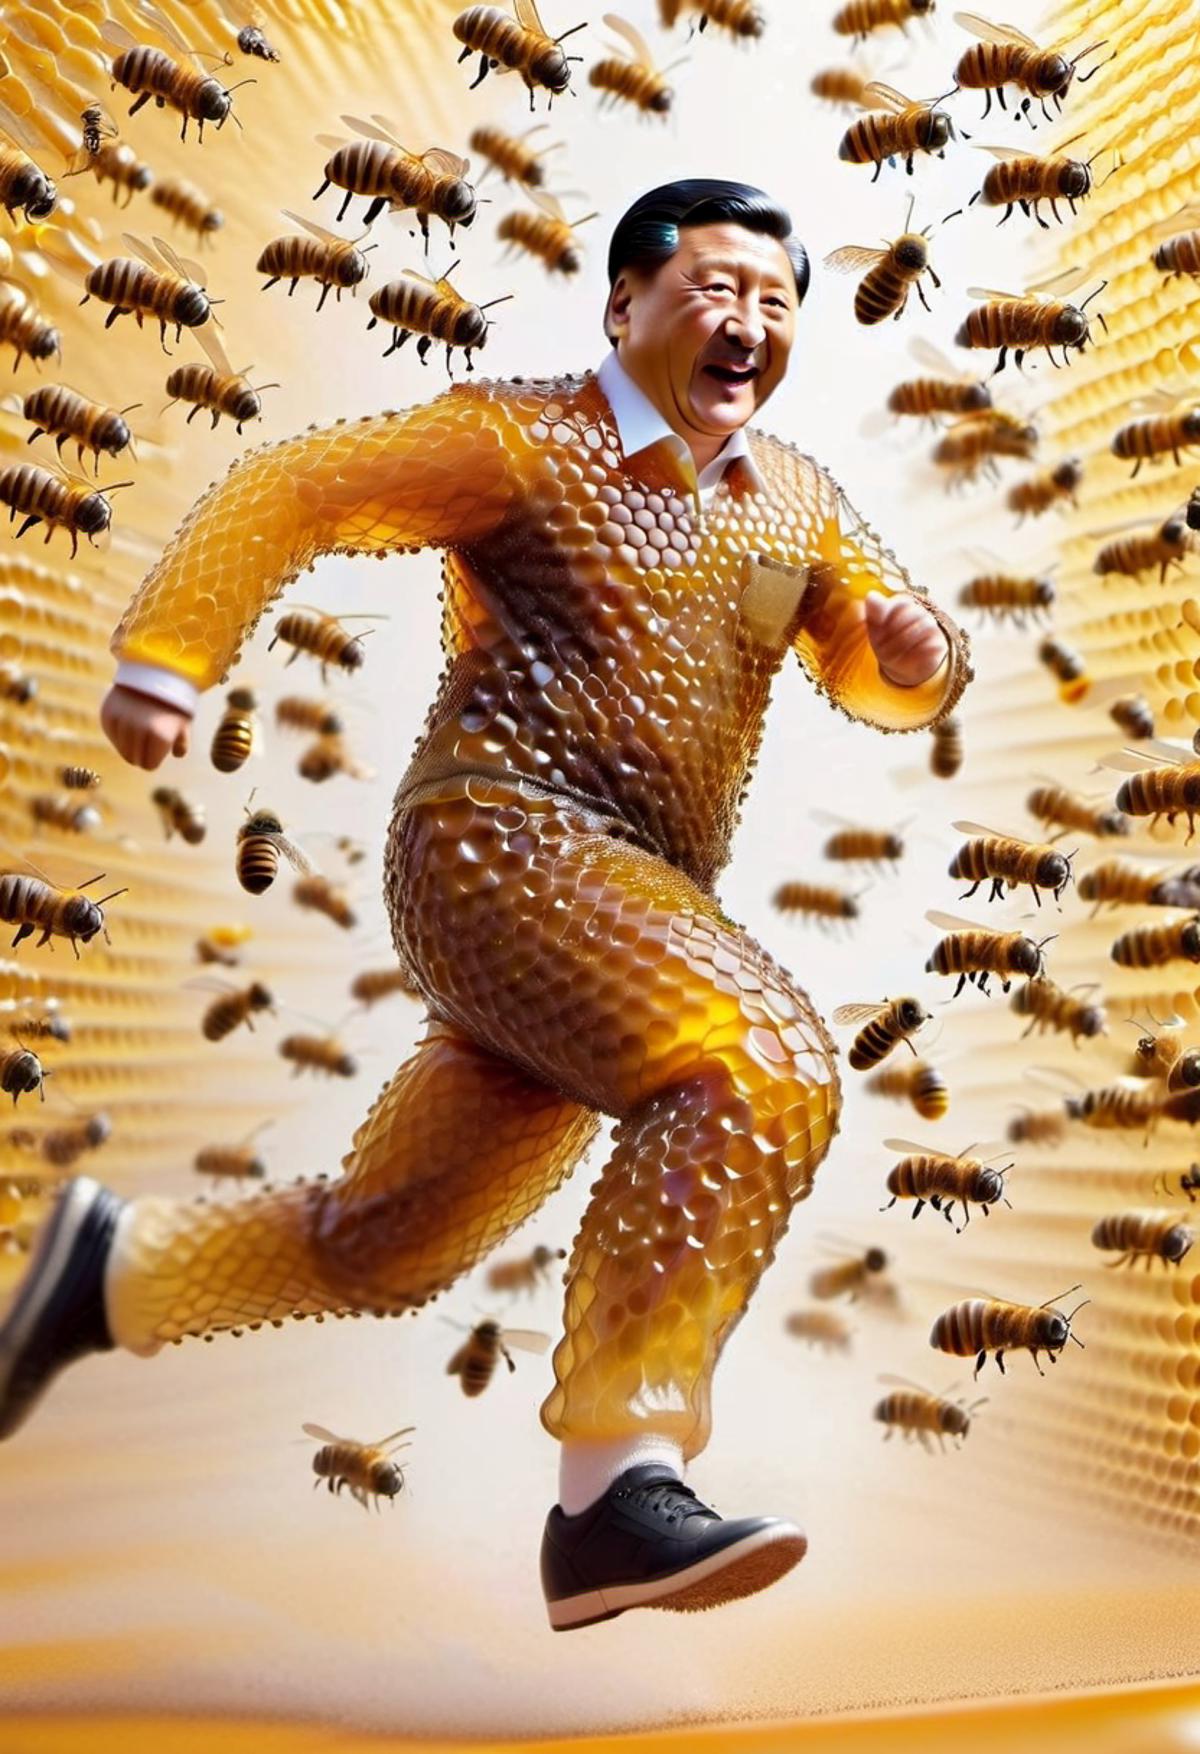 Action shot of Xi Jinping made of dvr-honey, carrying teddy bear made of dvr-honey, running away from bees.  <lora:HoneySt...